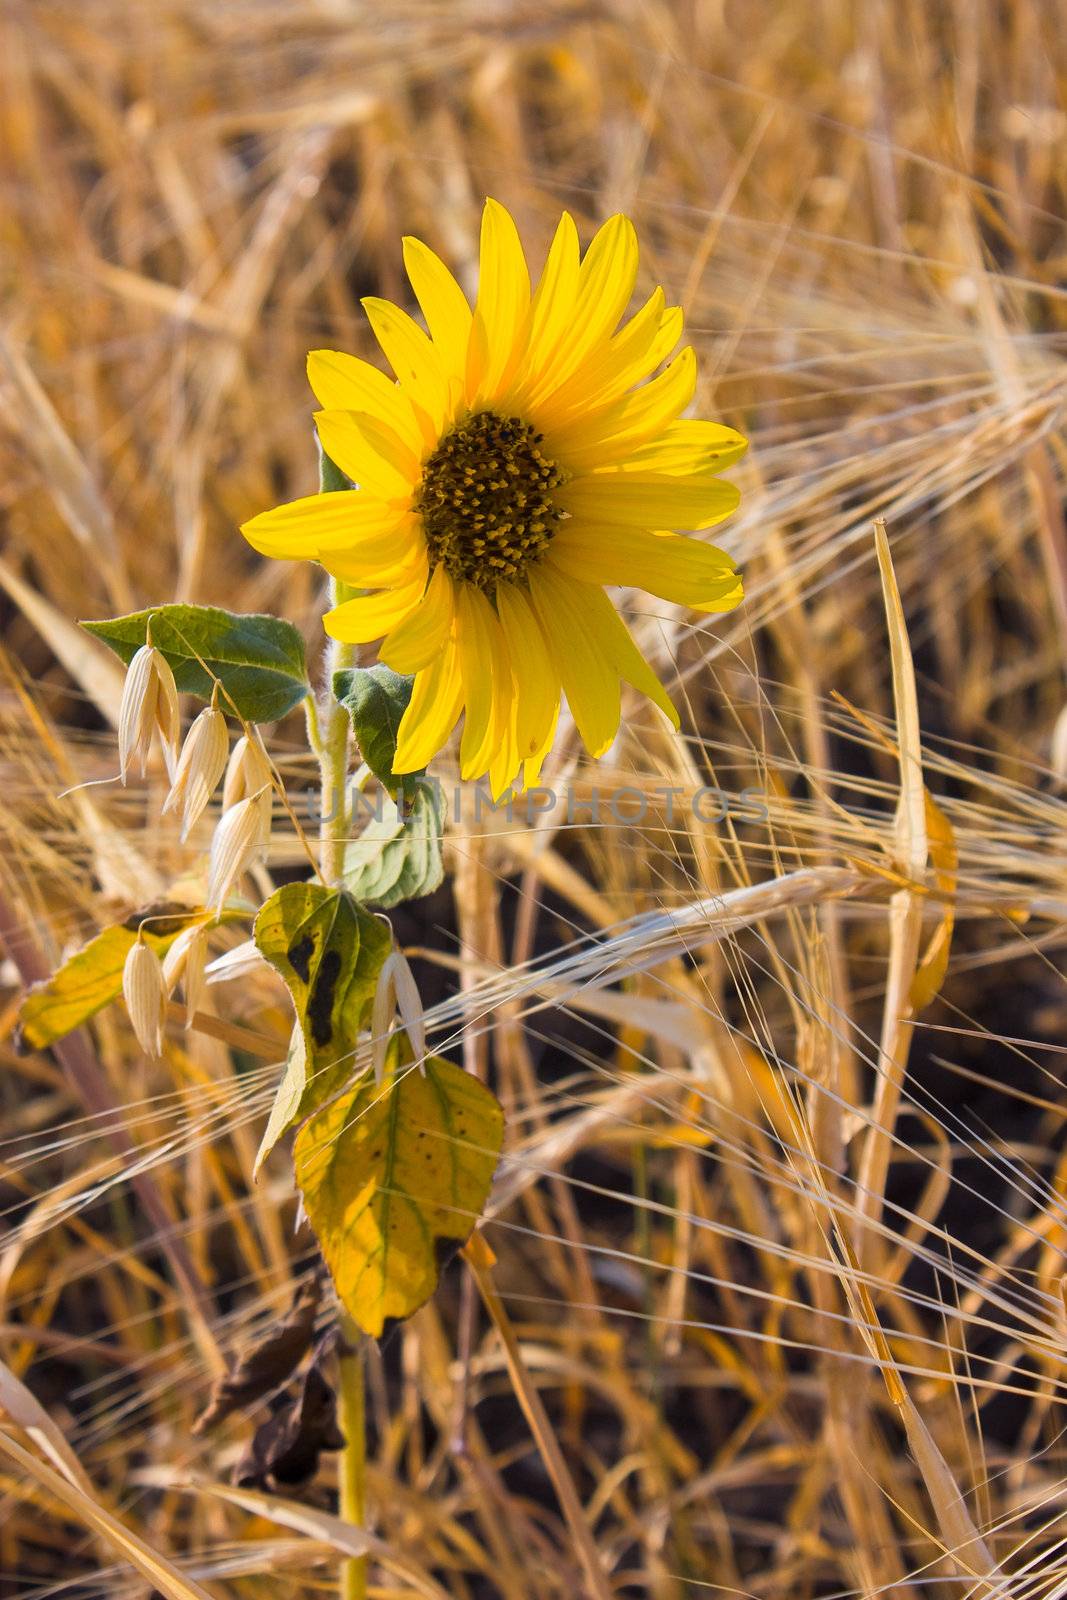 sunflower seeds at the barley field